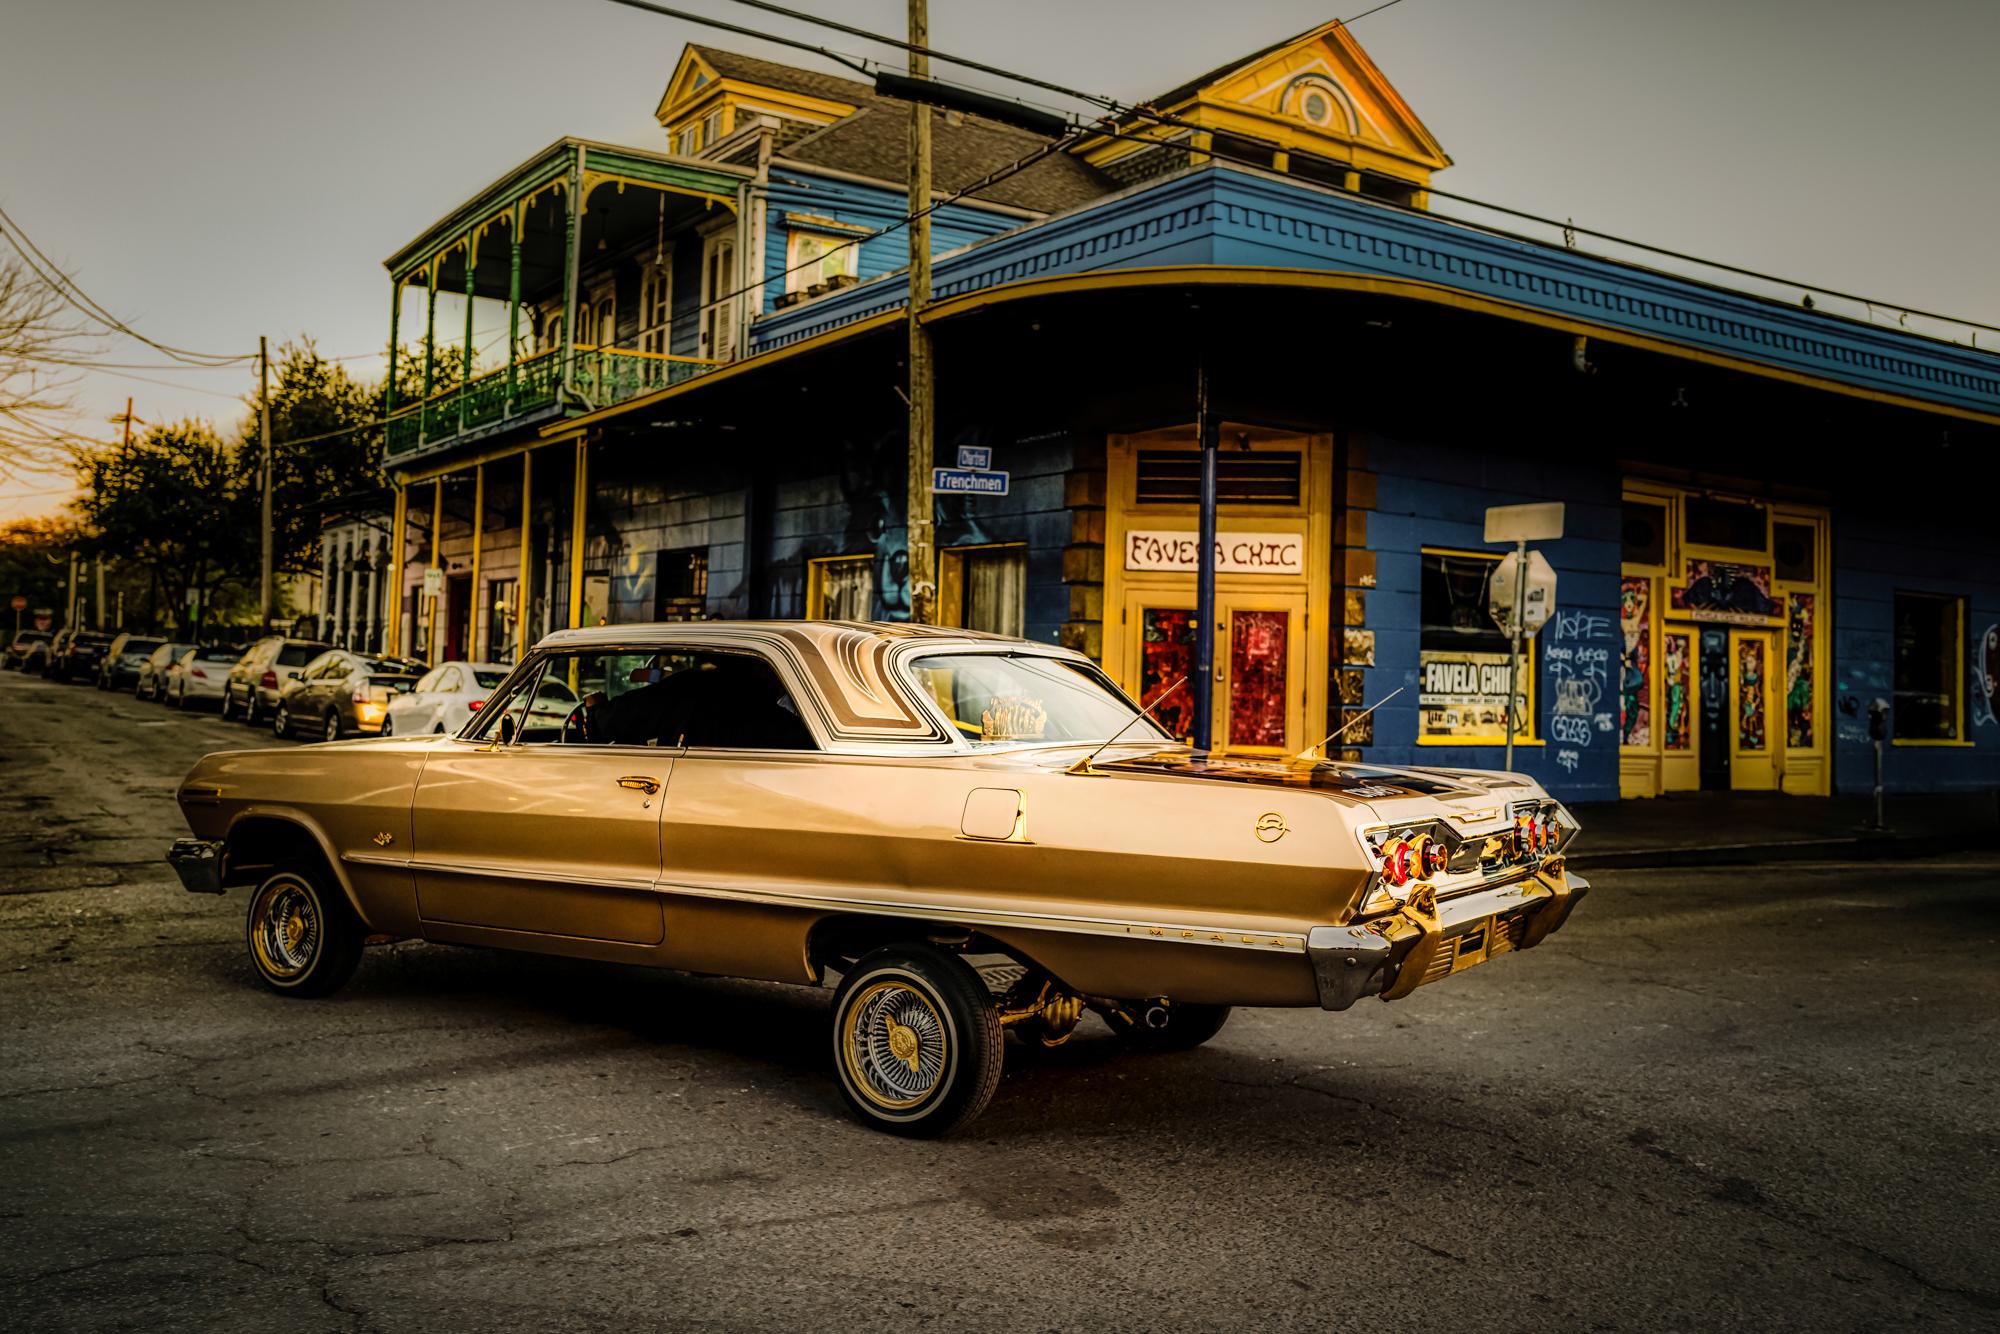 You're Now Beyond Hope -  Low Rider, Frenchmen St. New Orleans, LA - 2020 